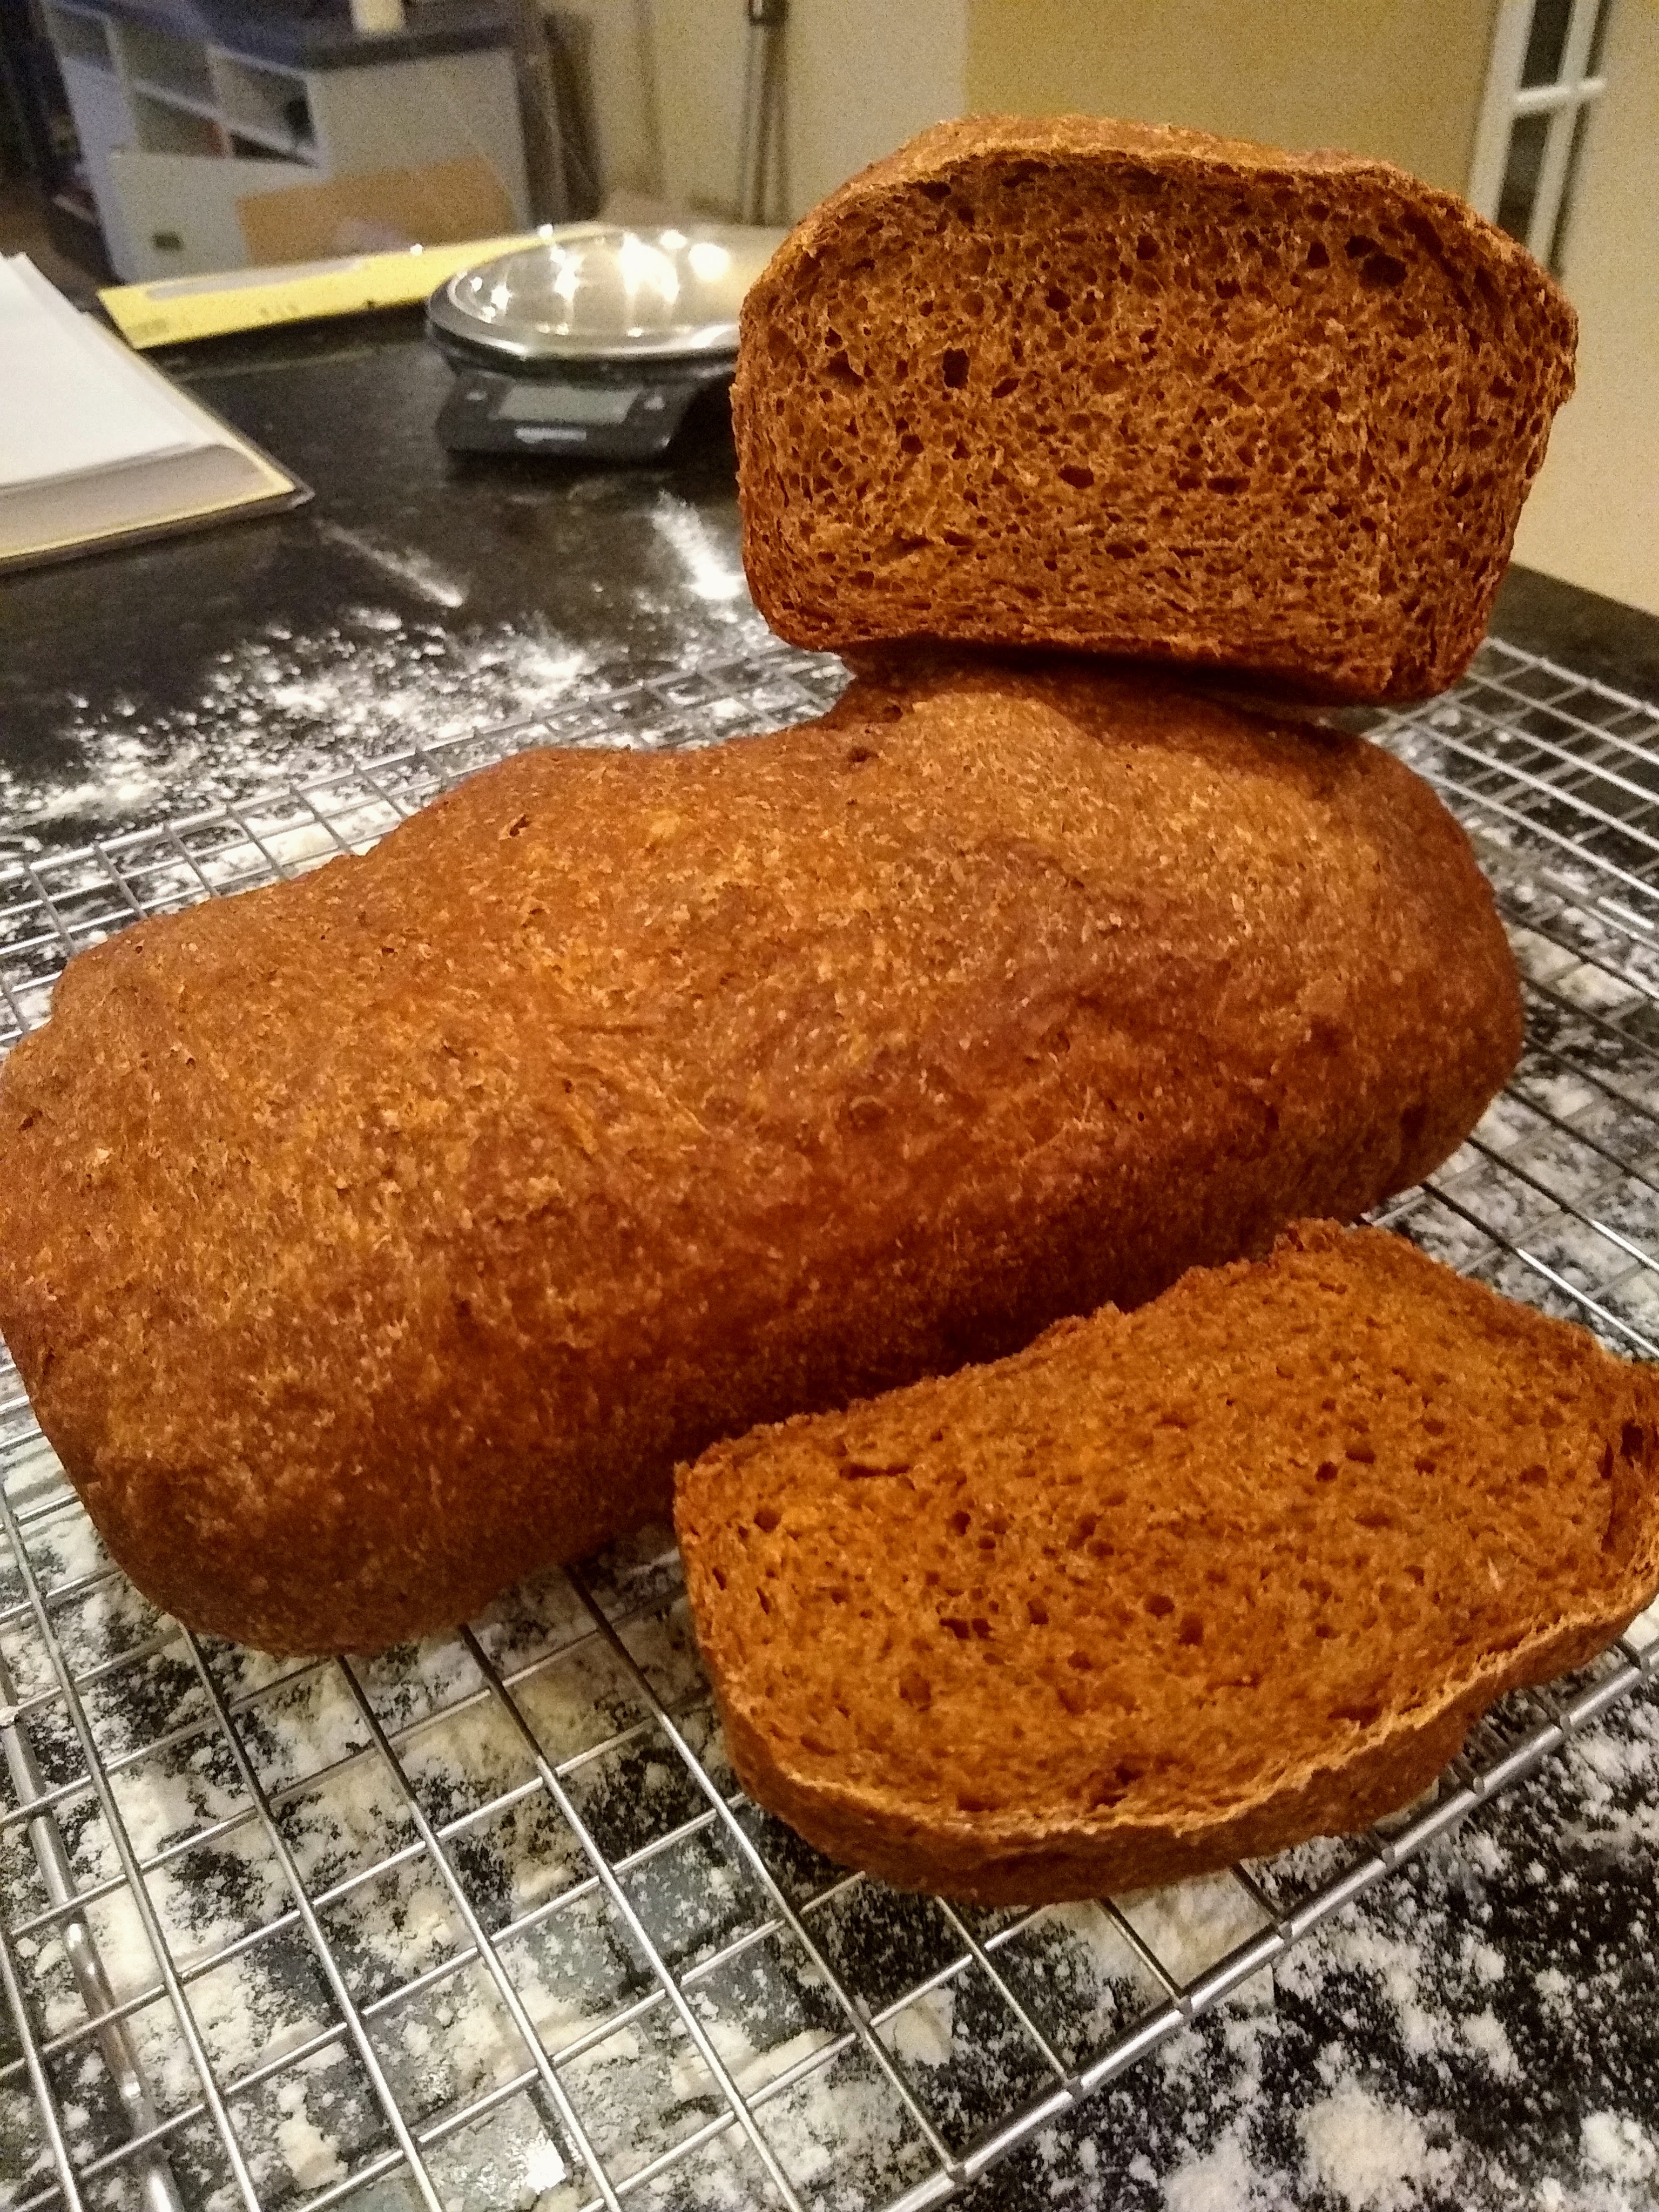 Finished loaves of pumpernickel bread.